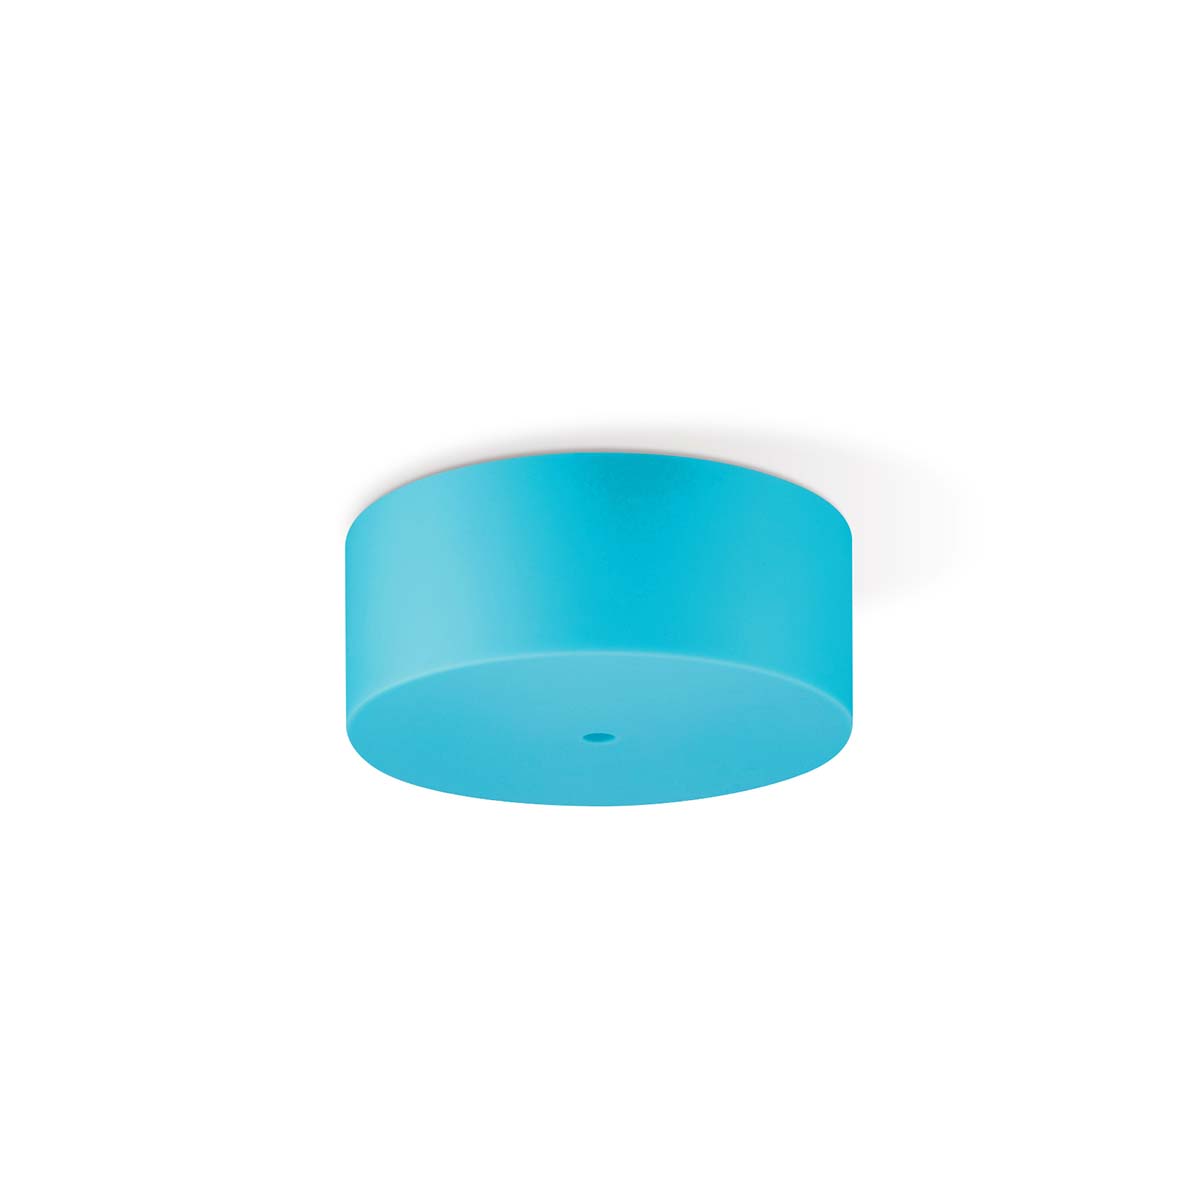 Tangla lighting - TLCP022-01LBL - Silicon 1 Light round canopy cylinder - light blue